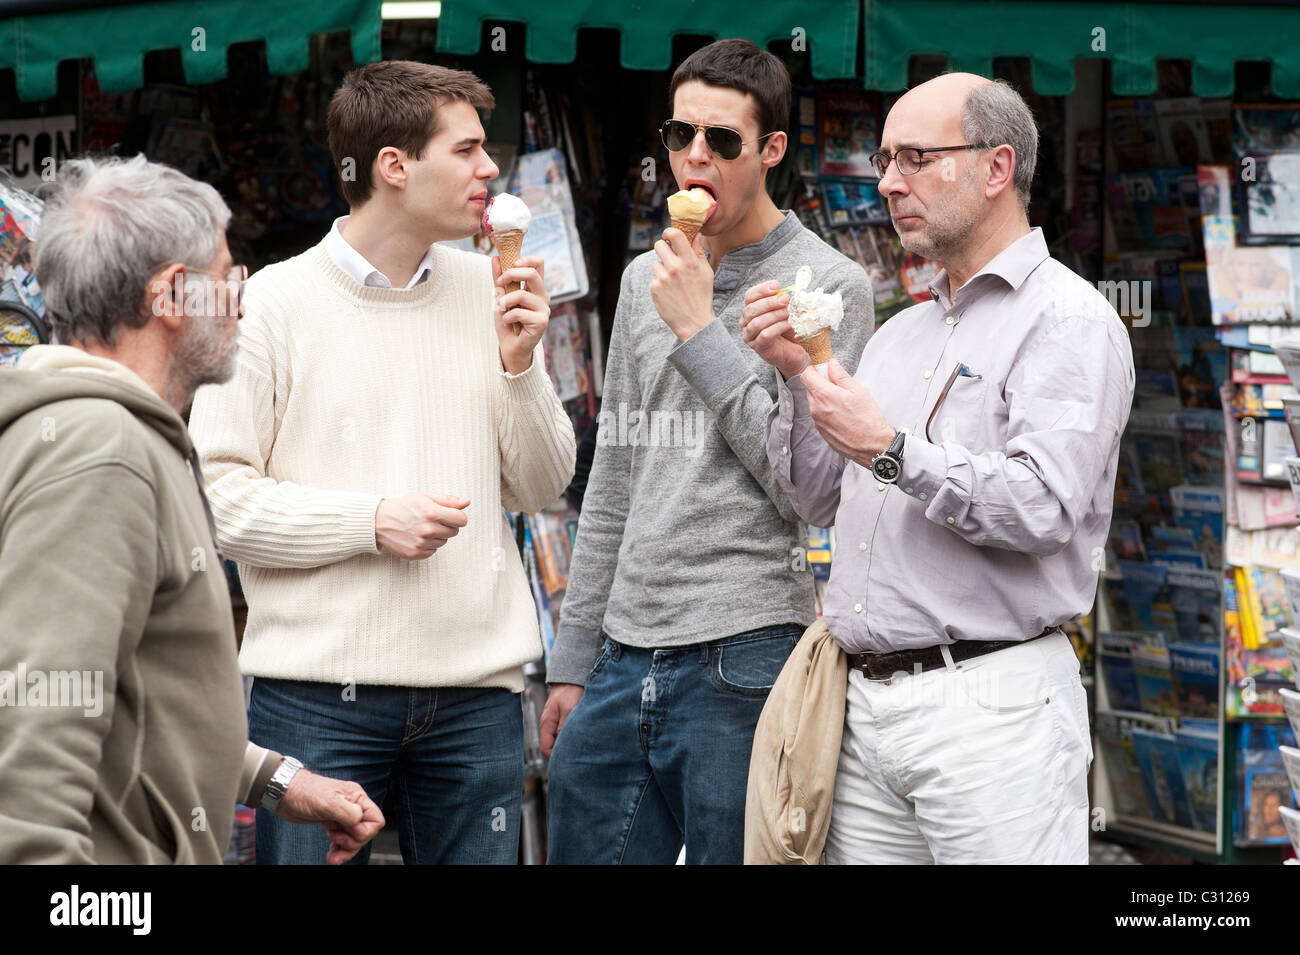 Rome, Italy -April 22, 2011 - people eating ice cream Stock Photo